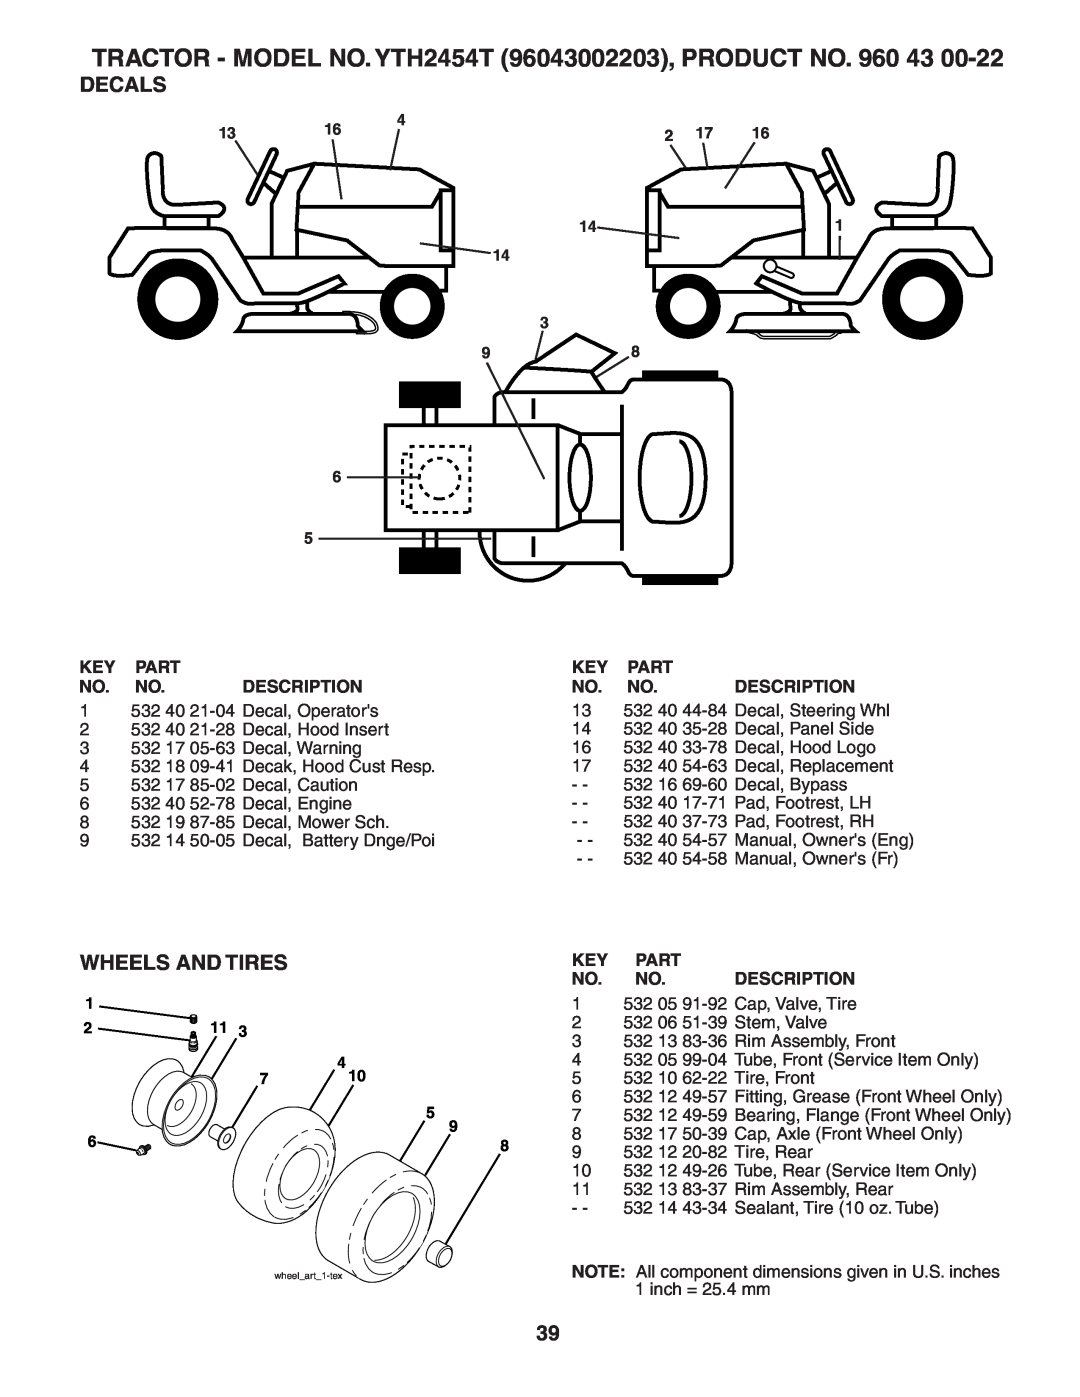 Husqvarna YTH2454T owner manual Decals, Wheels And Tires, Part, Description 